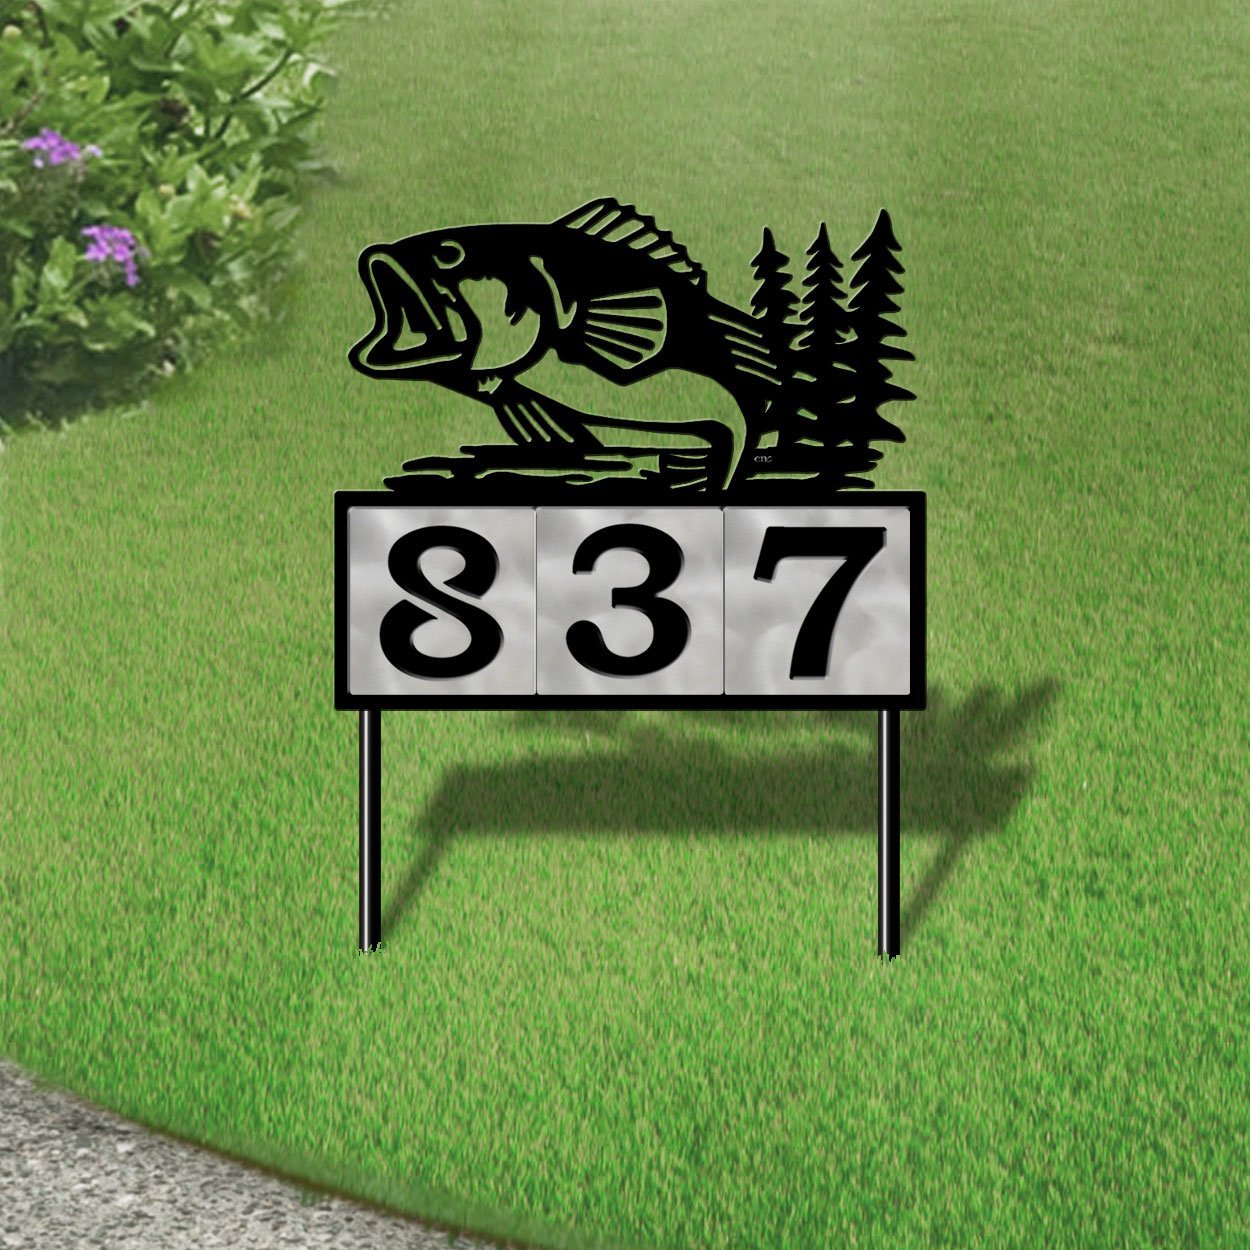 610013 - Jumping Bass with Trees Design 3-Digit Horizontal 6-inch Tile Outdoor House Numbers Yard Sign